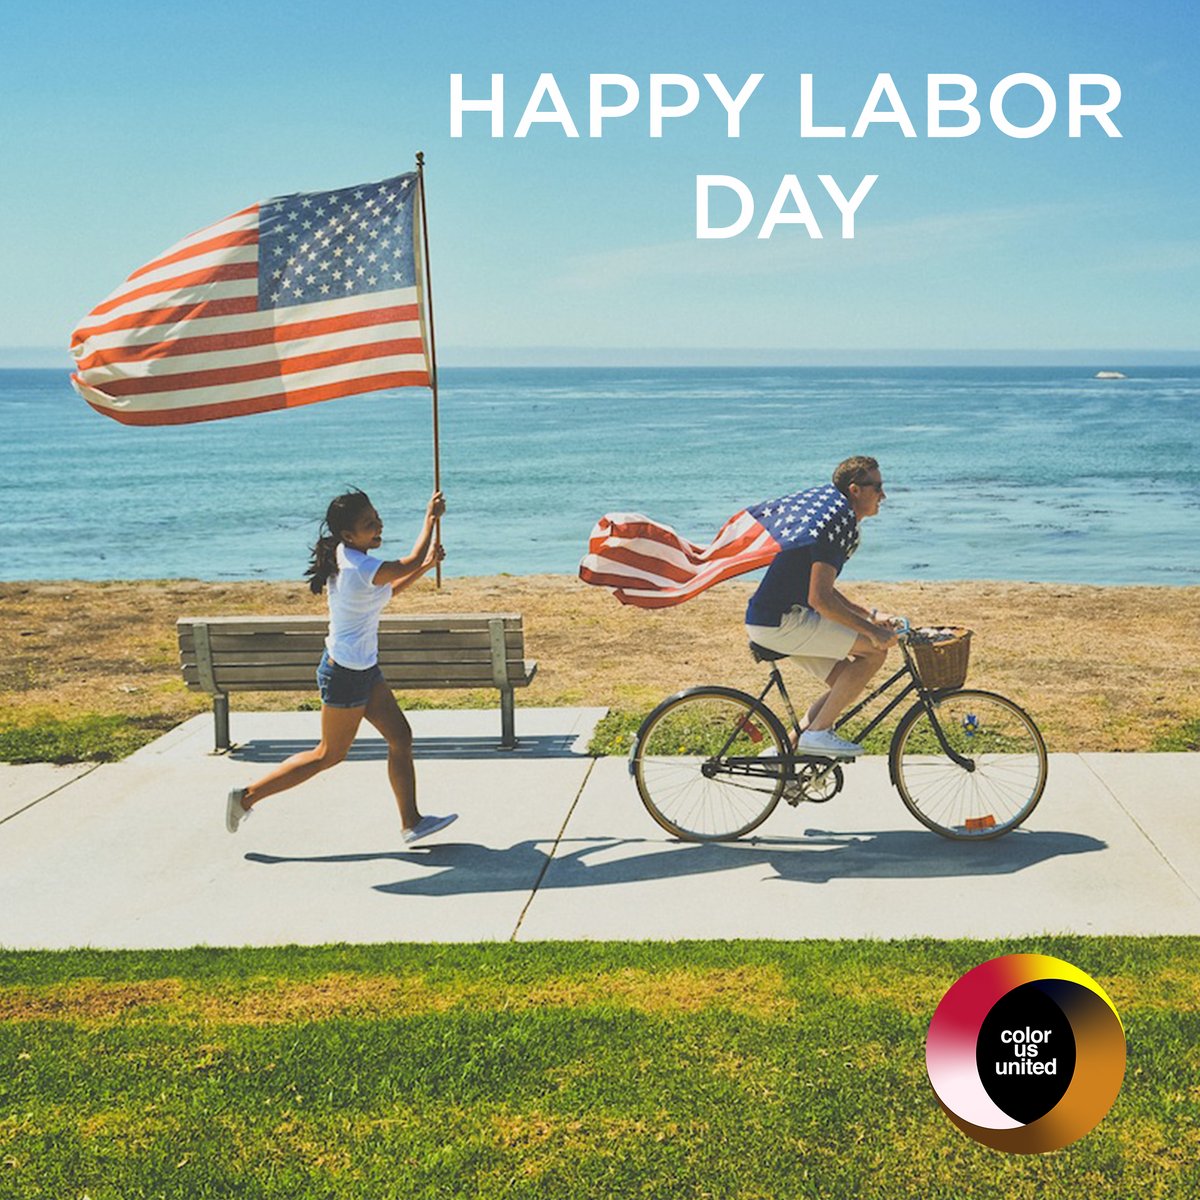 Summer’s ending and we’re coming into fall praising this country and everyone in it, regardless of race. #HappyLaborDay